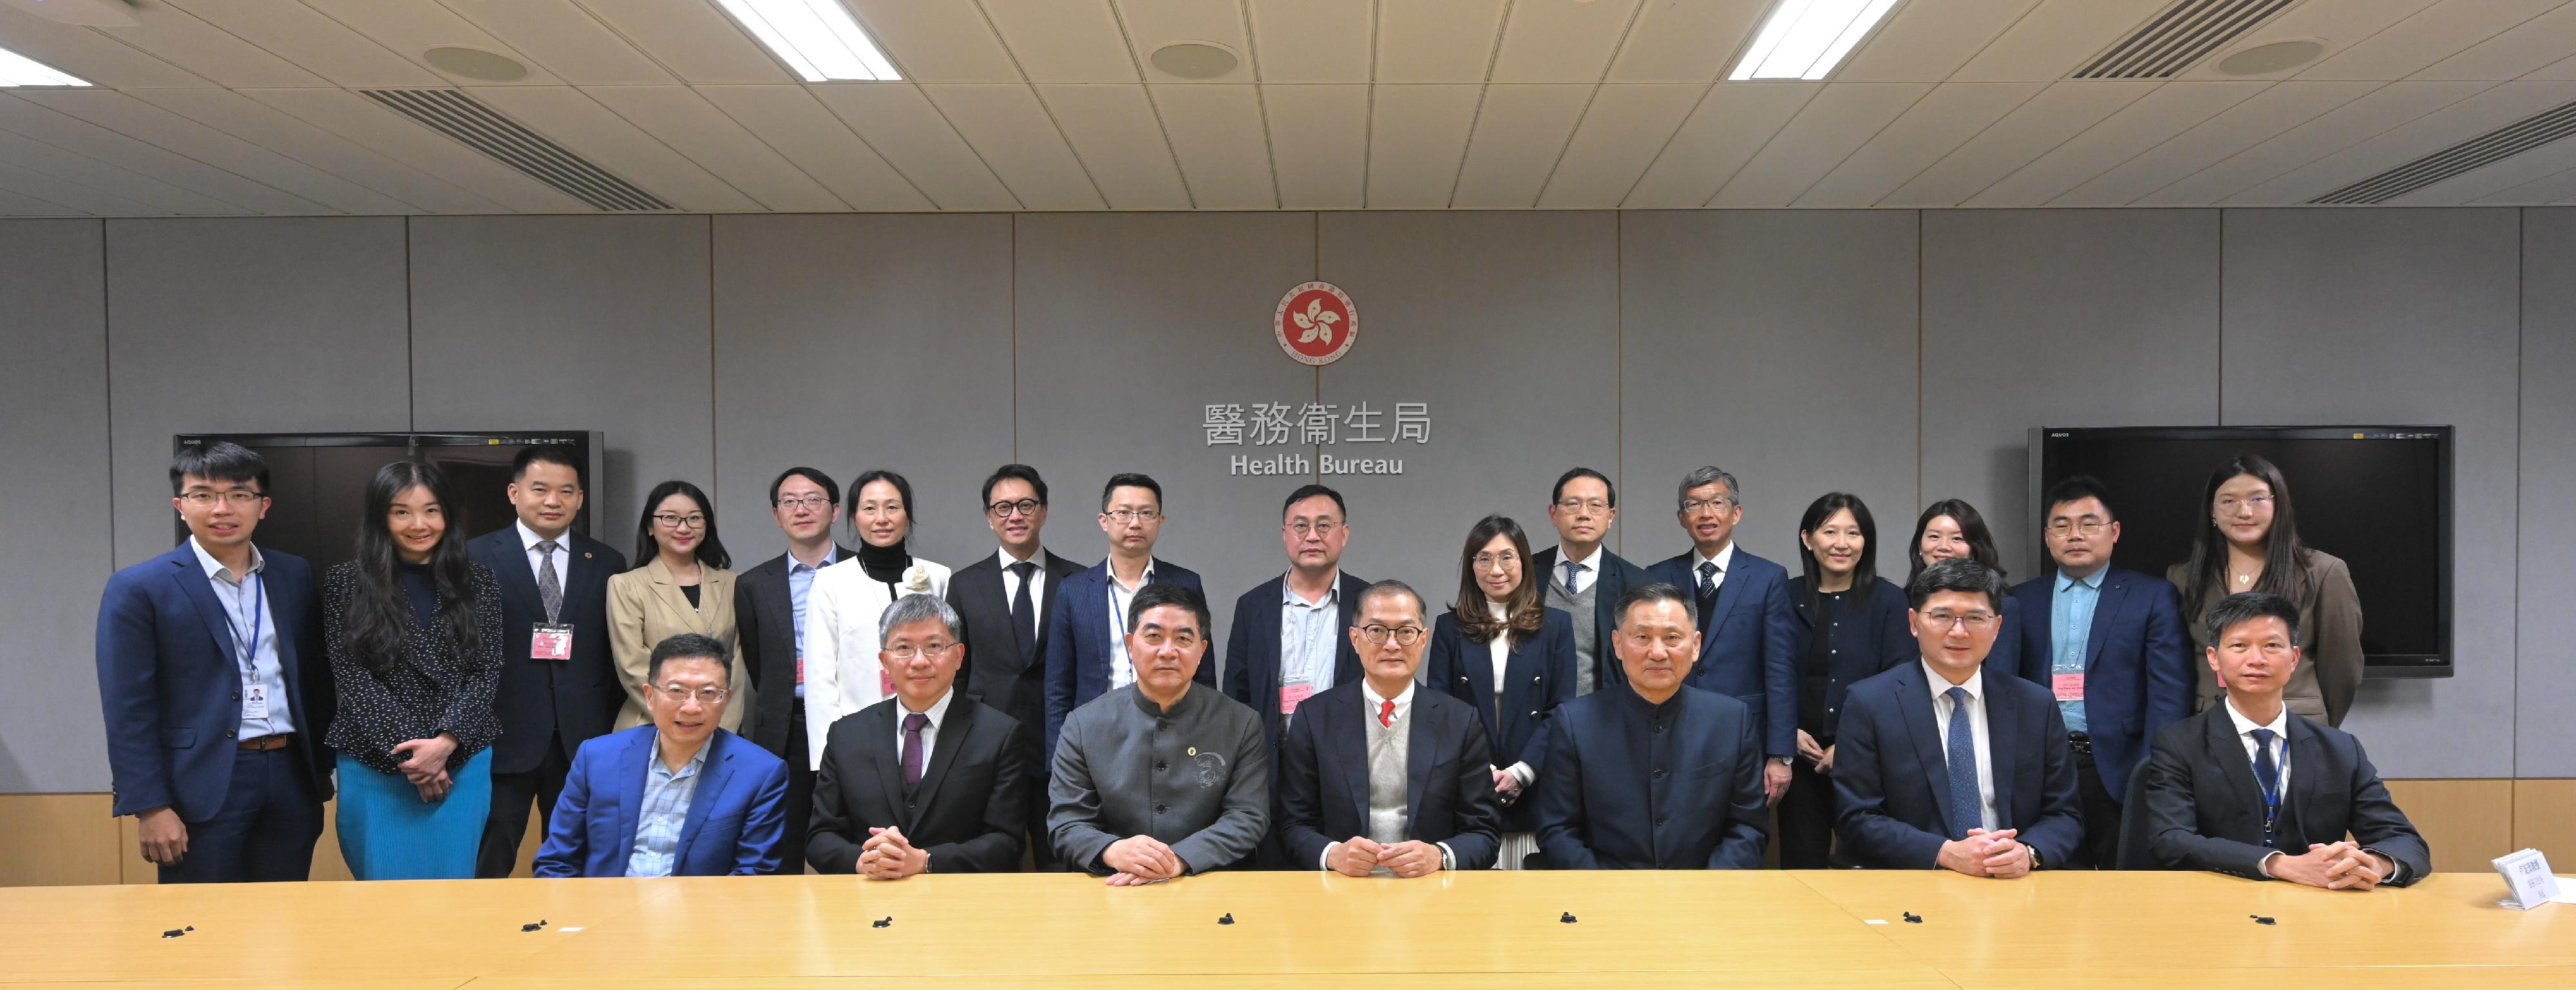 The Secretary for Health, Professor Lo Chung-mau, today (January 29) met with an expert delegation led by Professor Ge Junbo, an academician of the Chinese Academy of Sciences. Photo shows Professor Lo (front row, centre); Professor Ge (front row, third left); the Chairman of the China Chest Pain Centre Accreditation Committee, Professor Huo Yong (front row, third right); the Permanent Secretary for Health, Mr Thomas Chan (front row, second left); the Chief Executive of the Hospital Authority, Dr Tony Ko (front row, second right), and other attendees of the meeting.